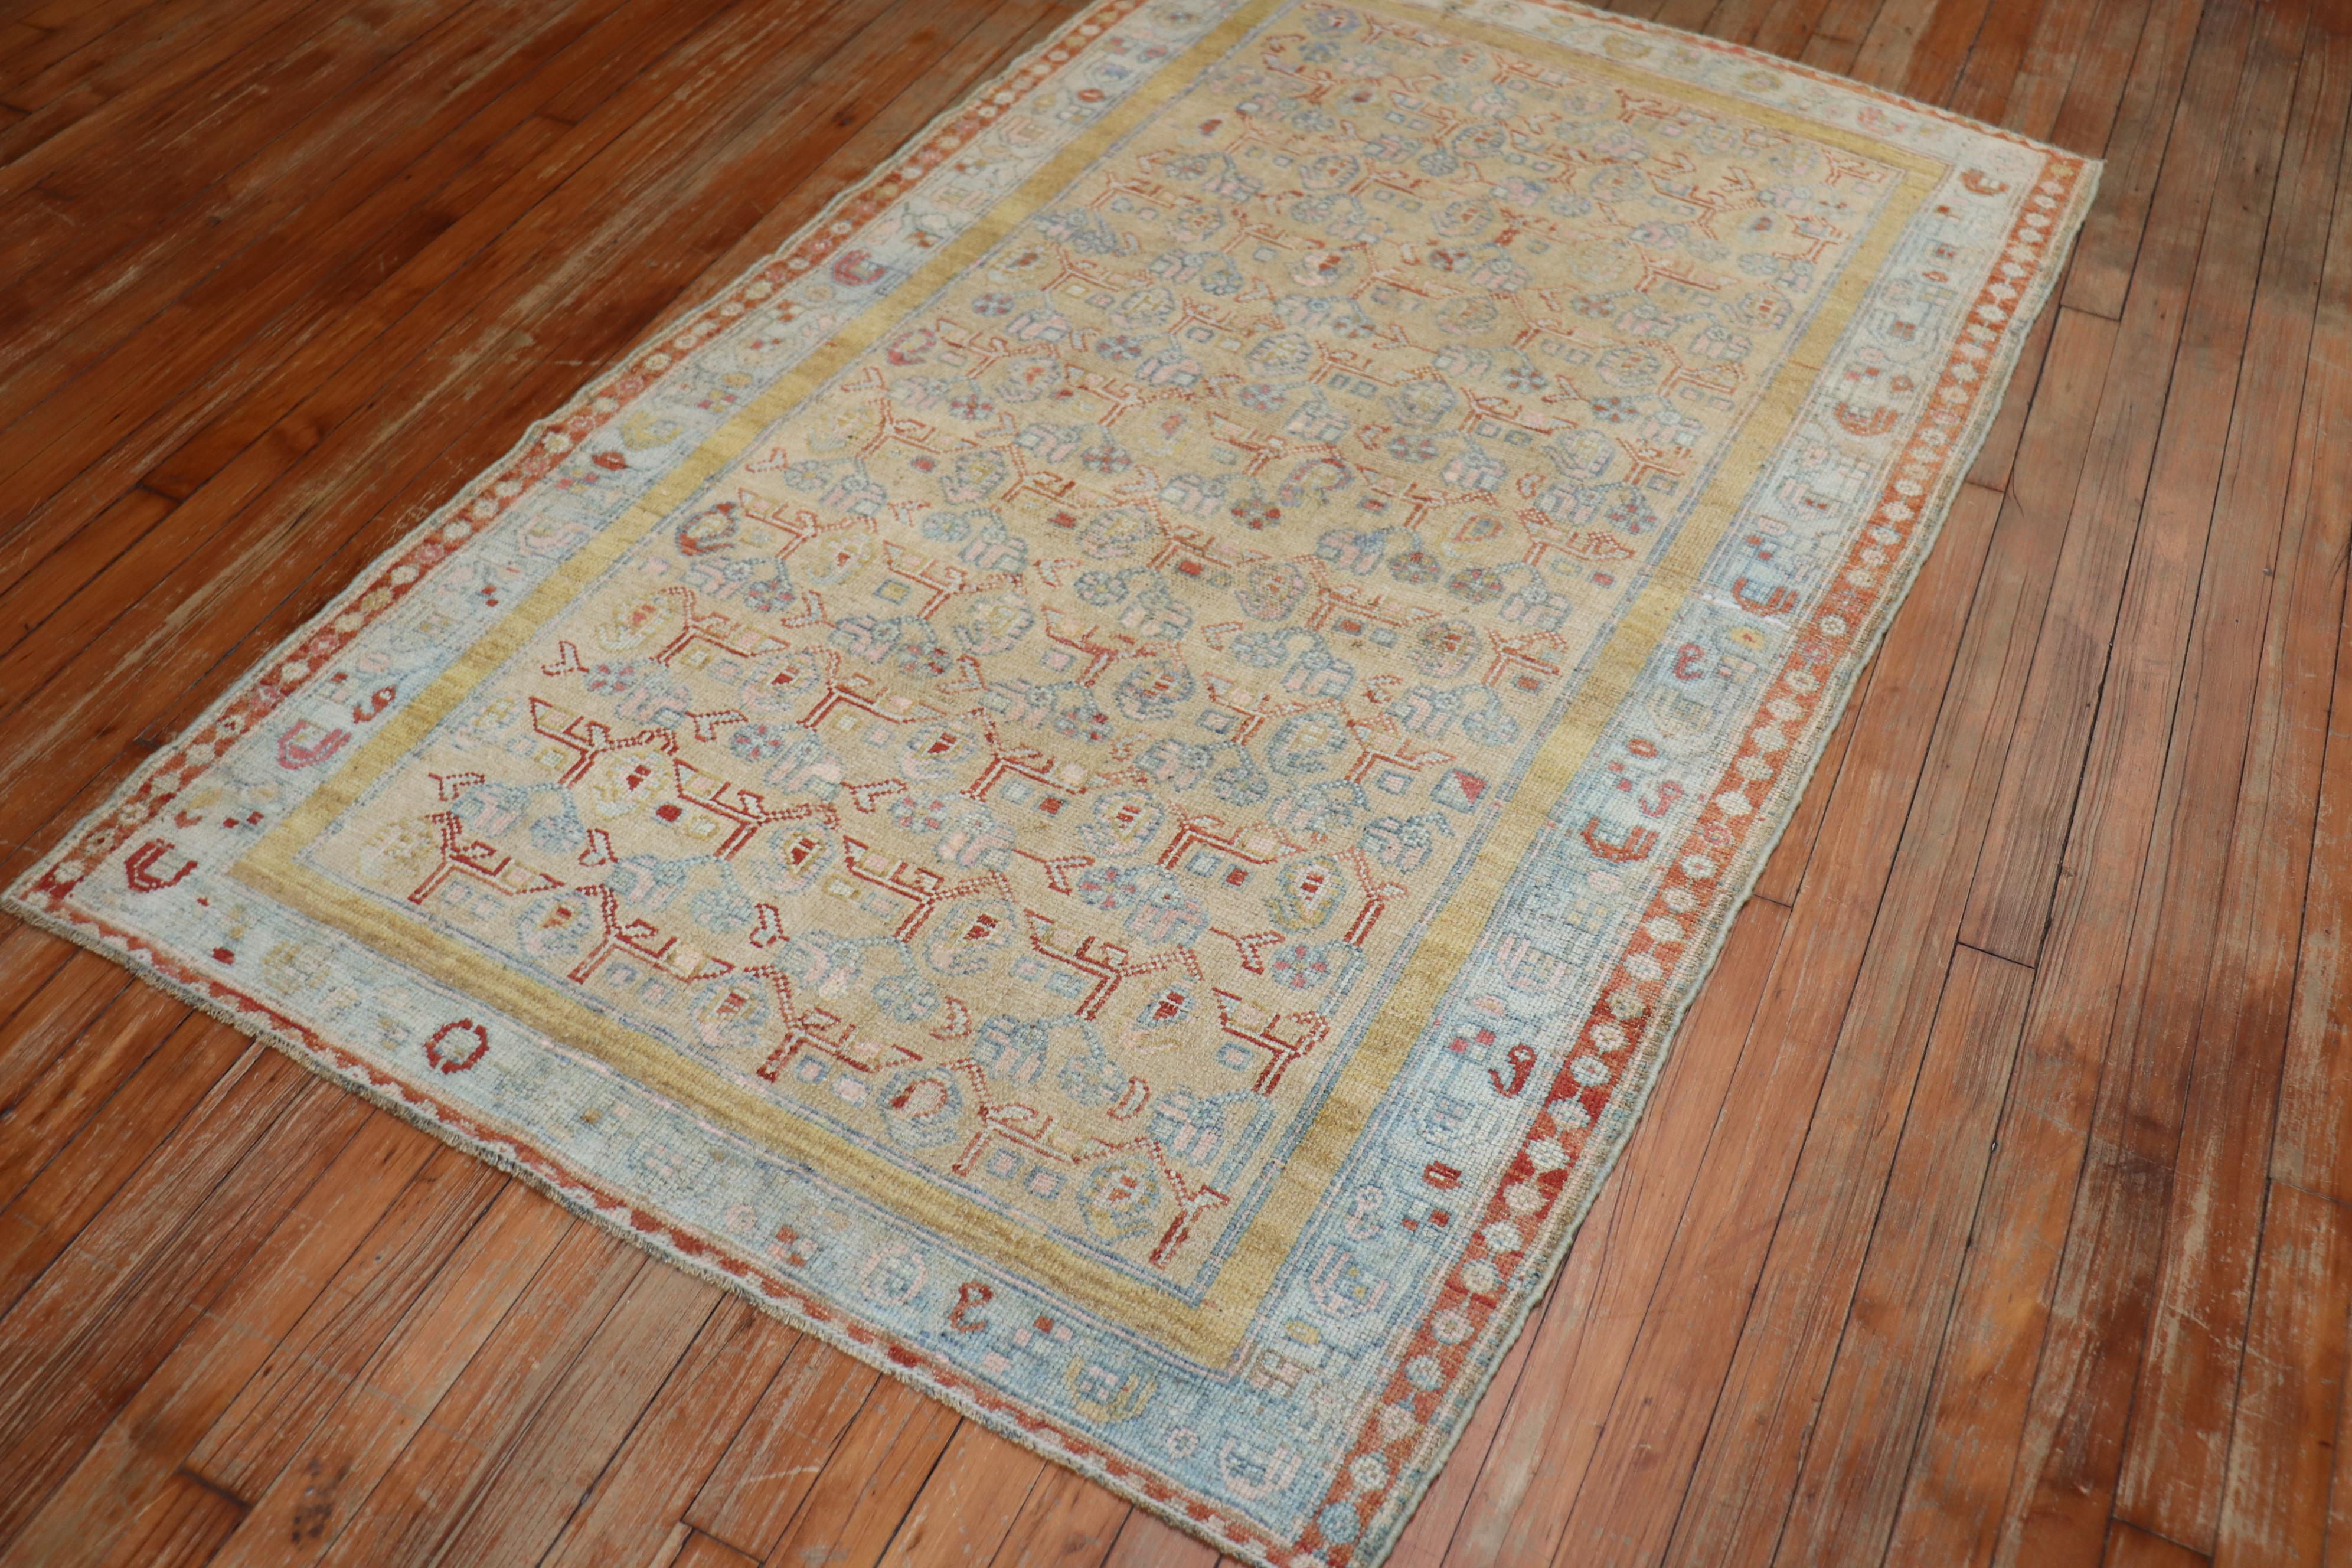 An early 20th century Persian Kurdish rug in muted tones. The field is a pale brown, light blue border, accents in pink, terracotta, and rust.

Measures: 3'8